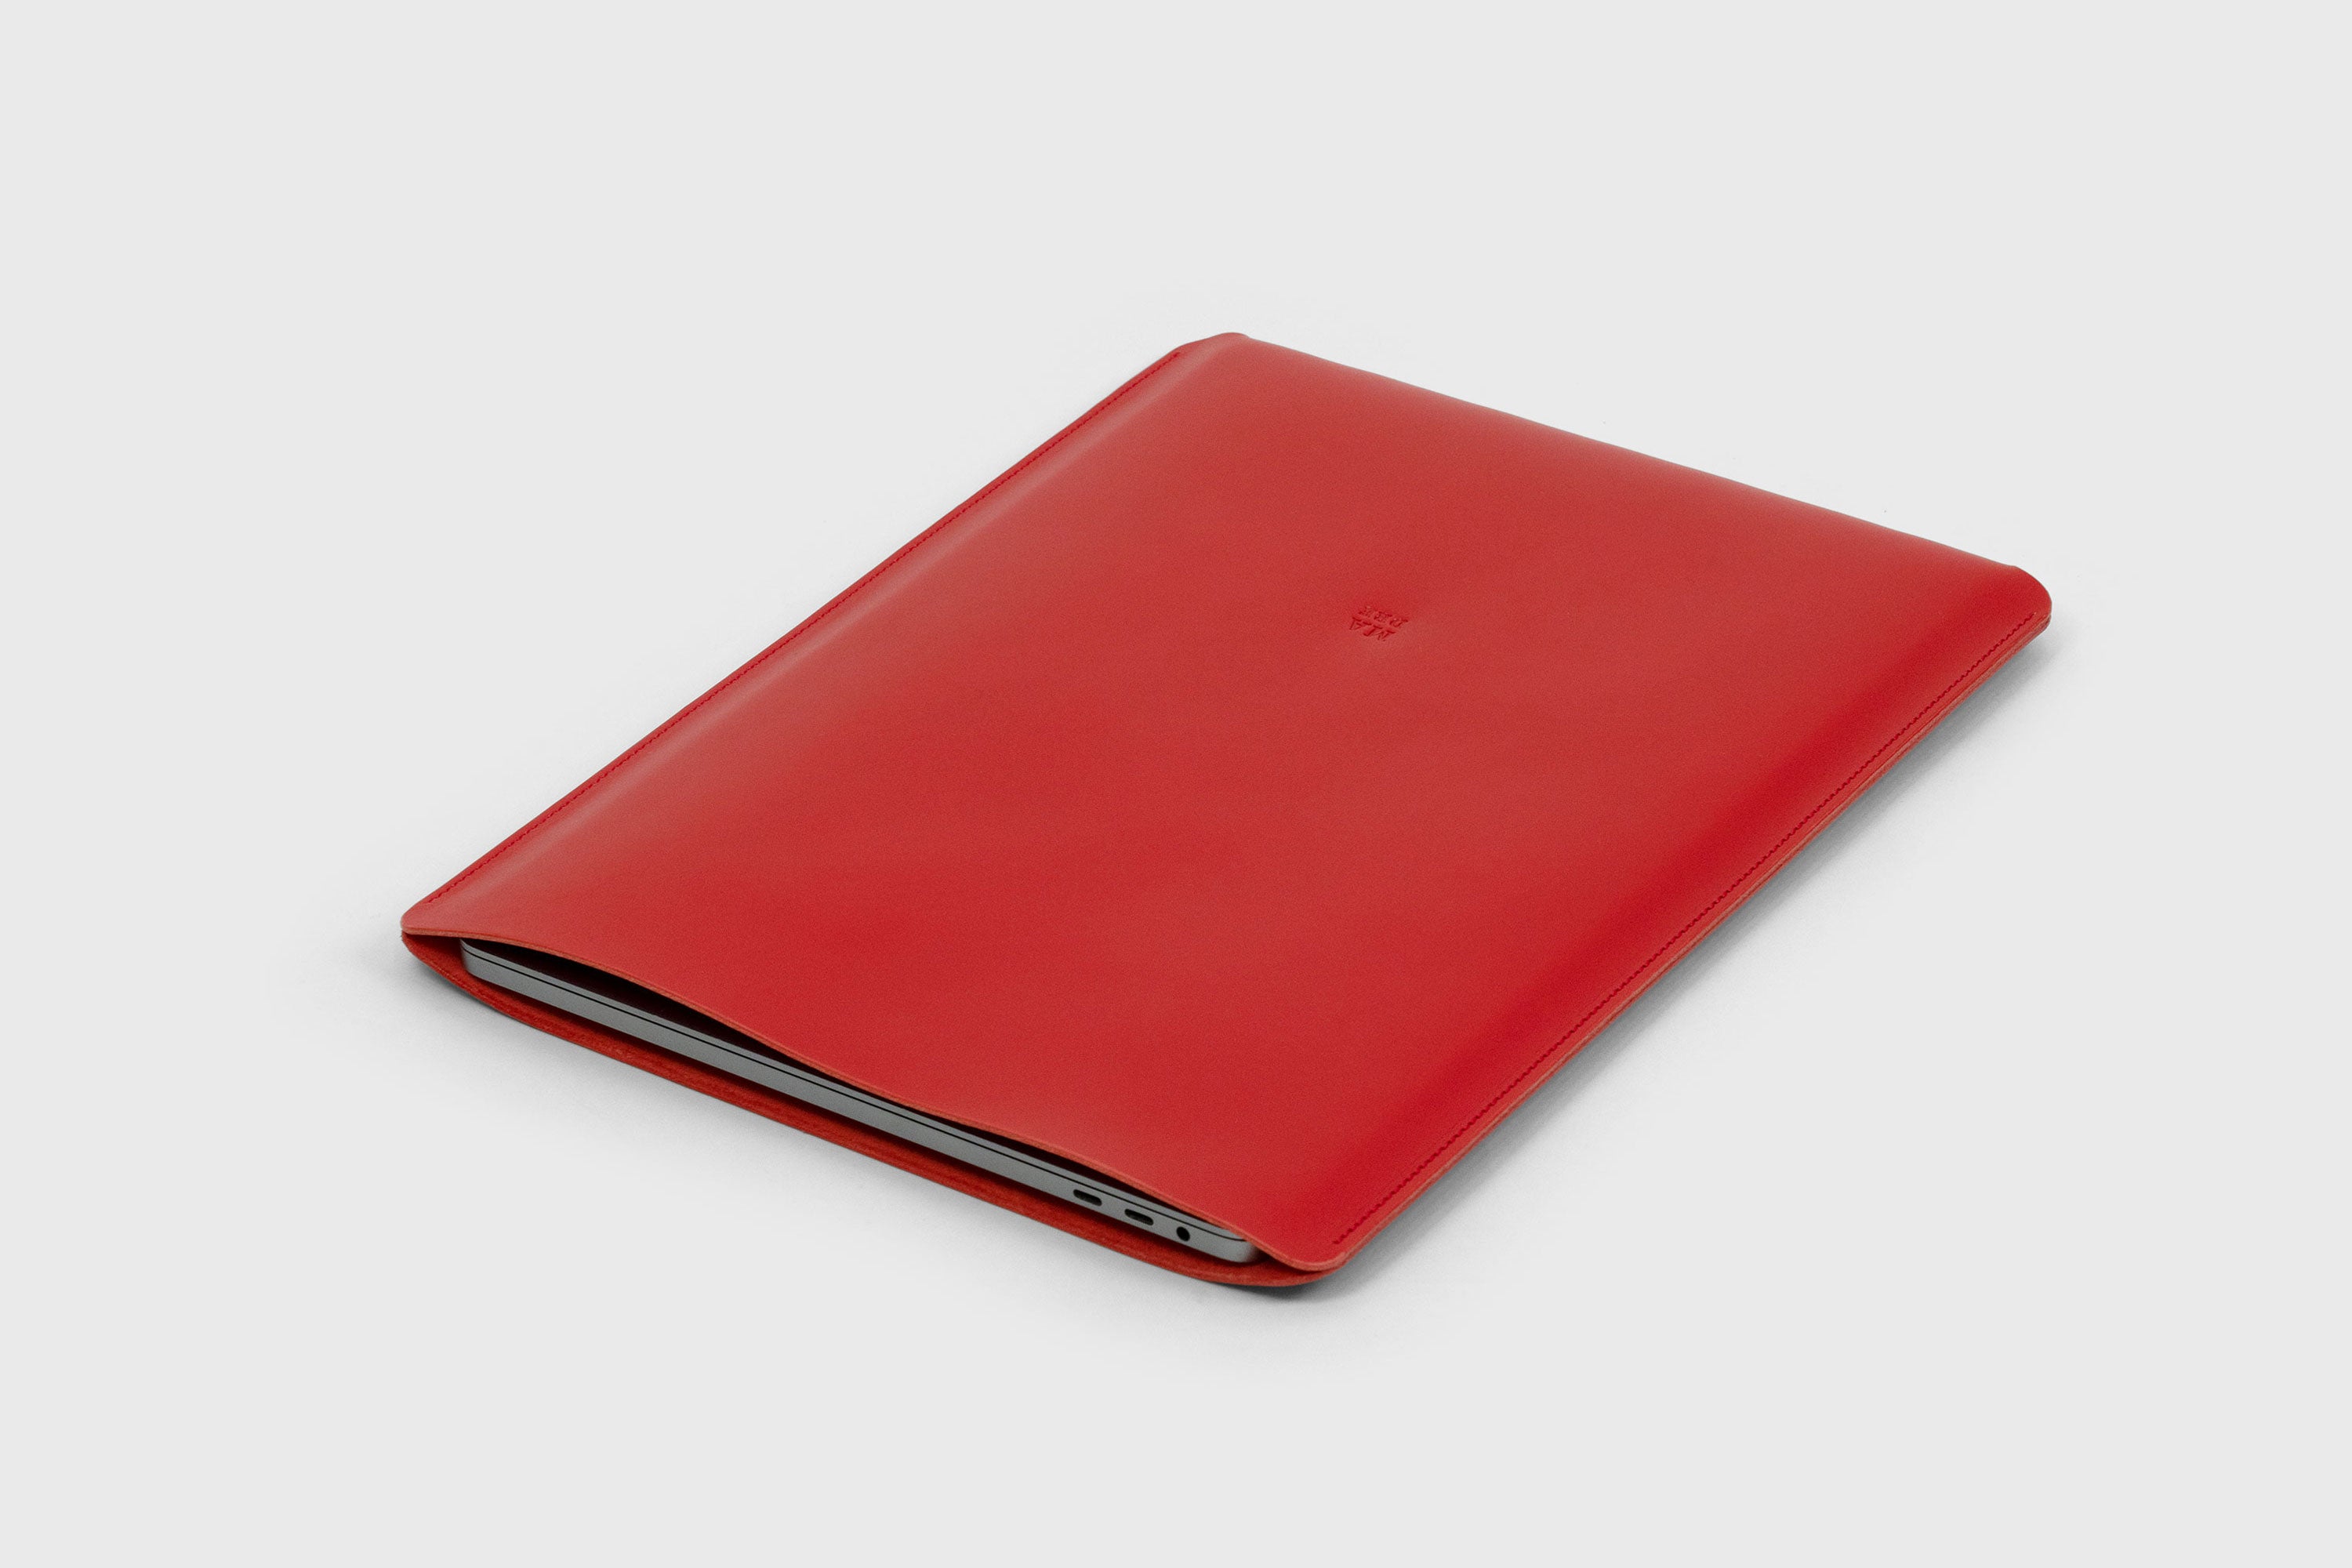 MacBook Air 15 Inch Sleeve Leather Red Colour Minimalistic Design Premium Quality By Atelier Madre Manuel Dreesmann Atelier Madre Barcelona Spain